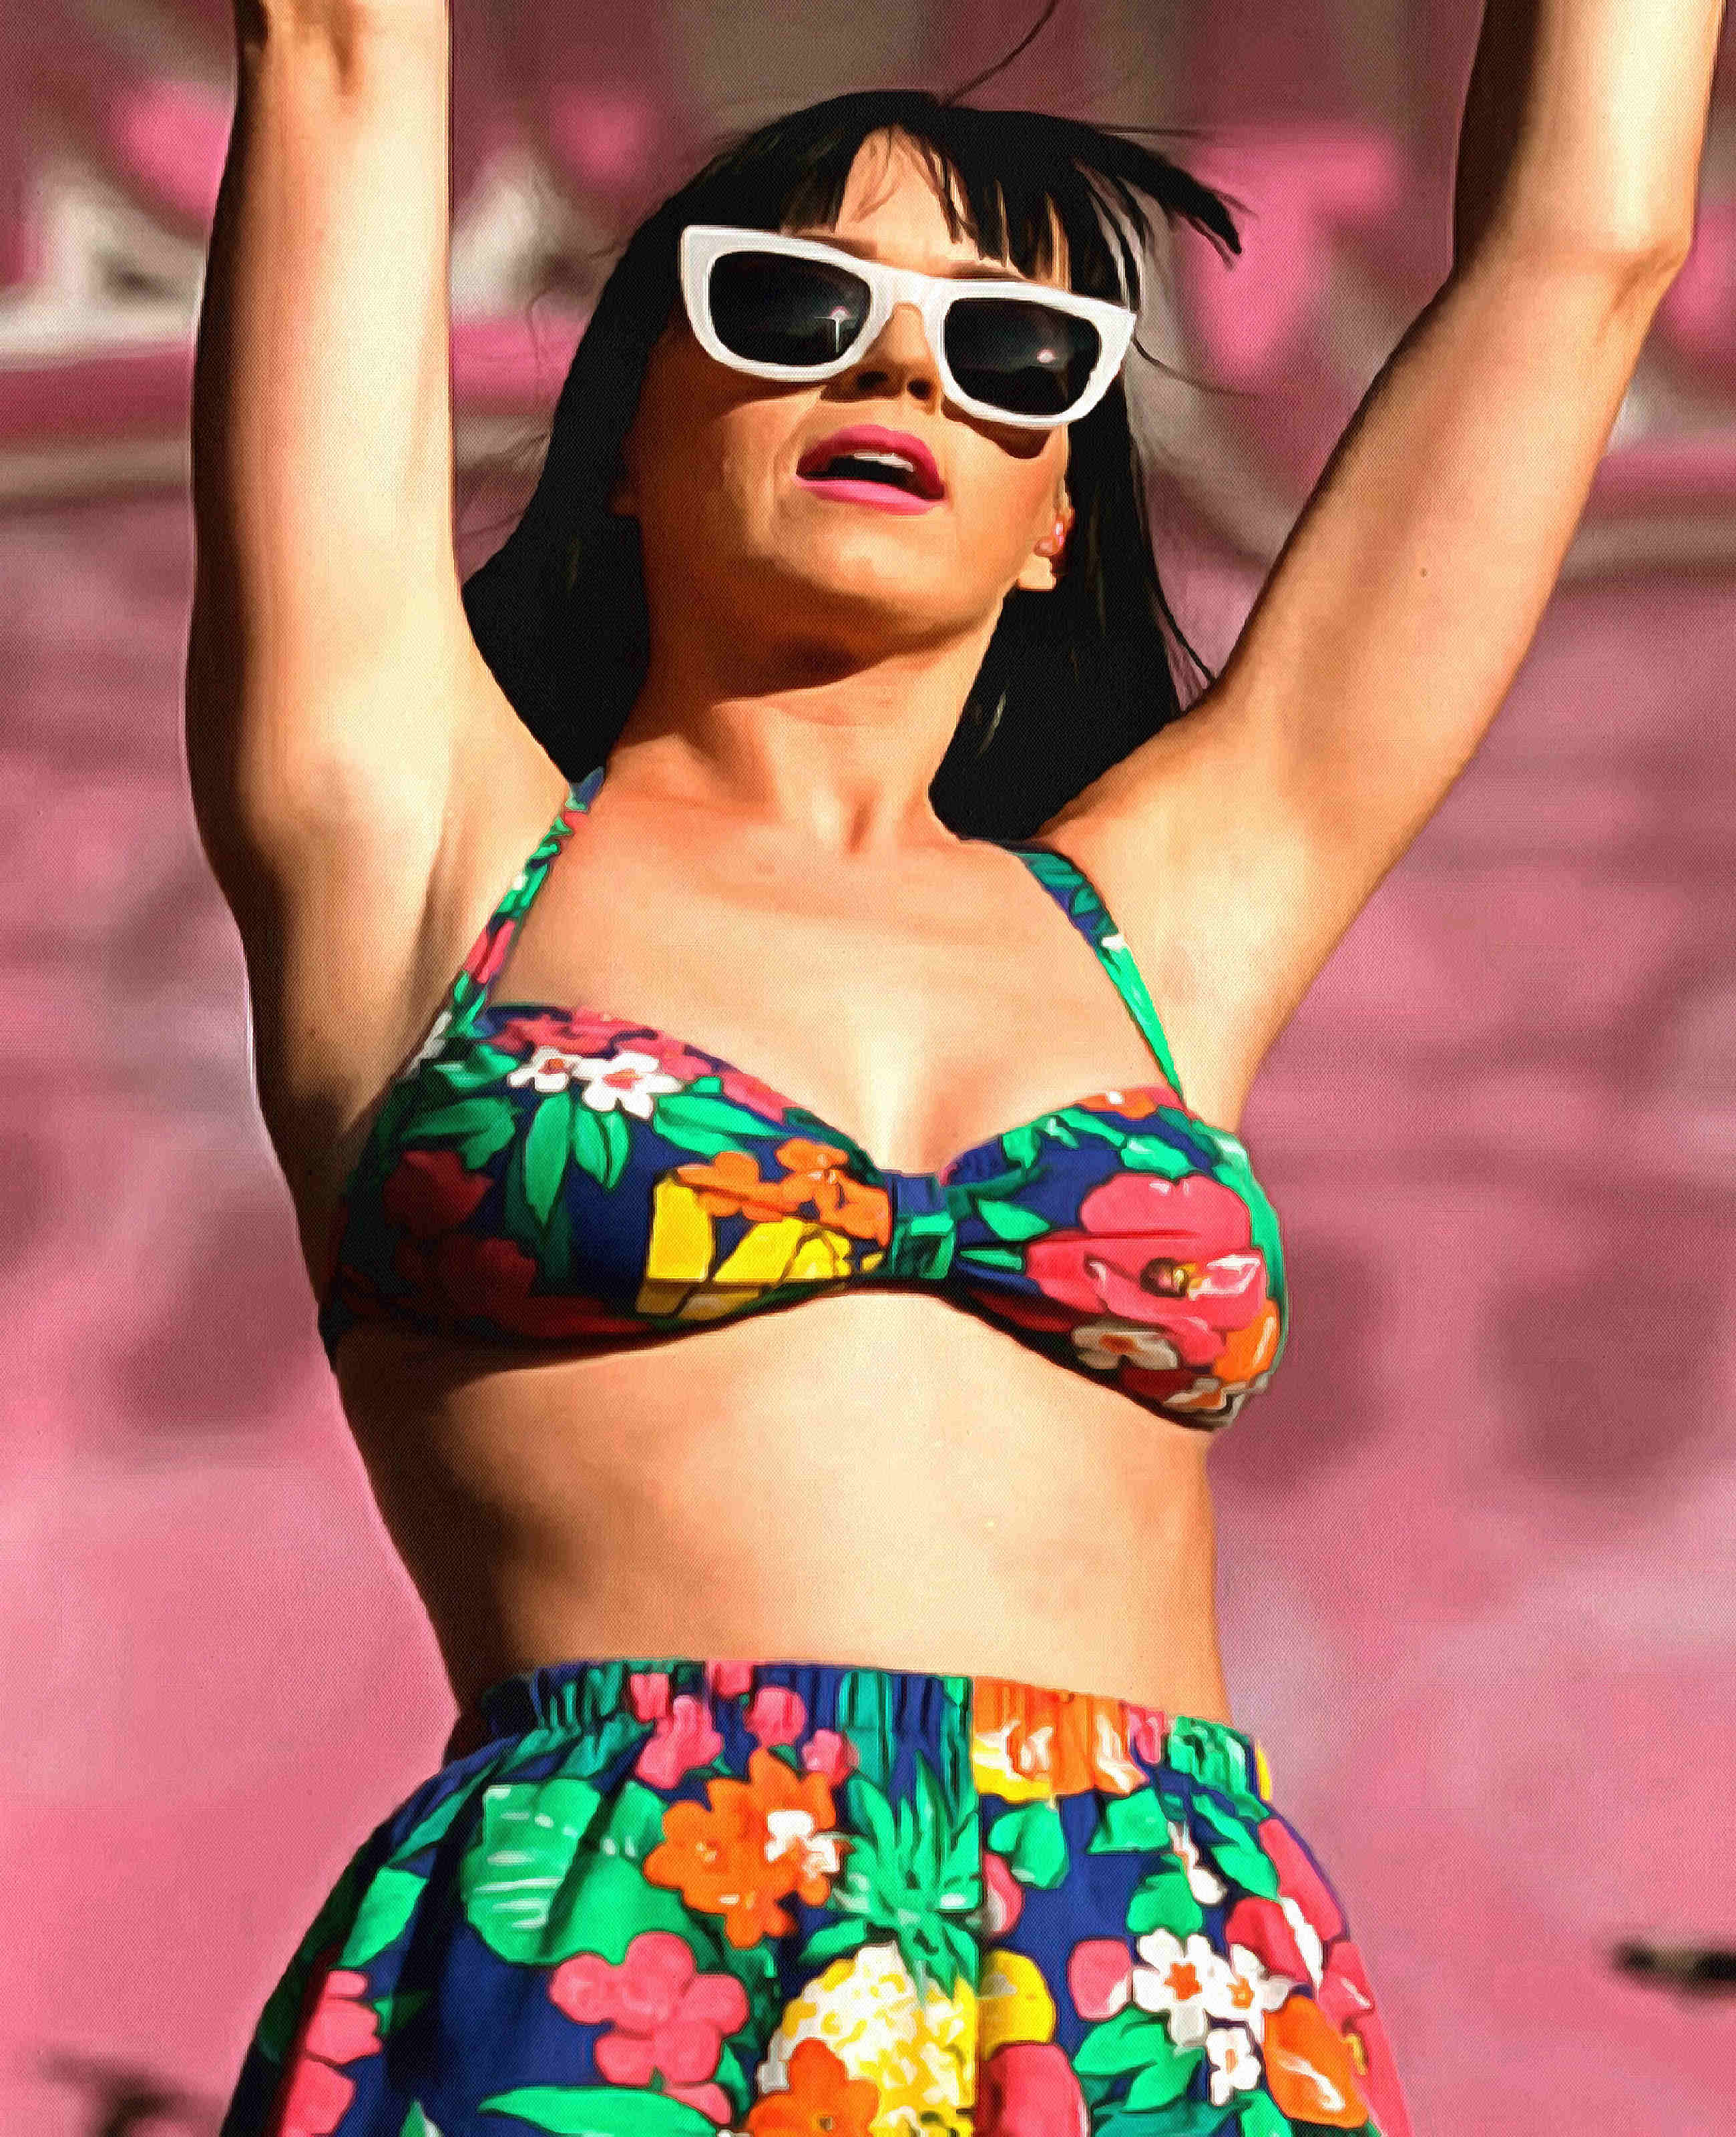 cool facts about katy perry